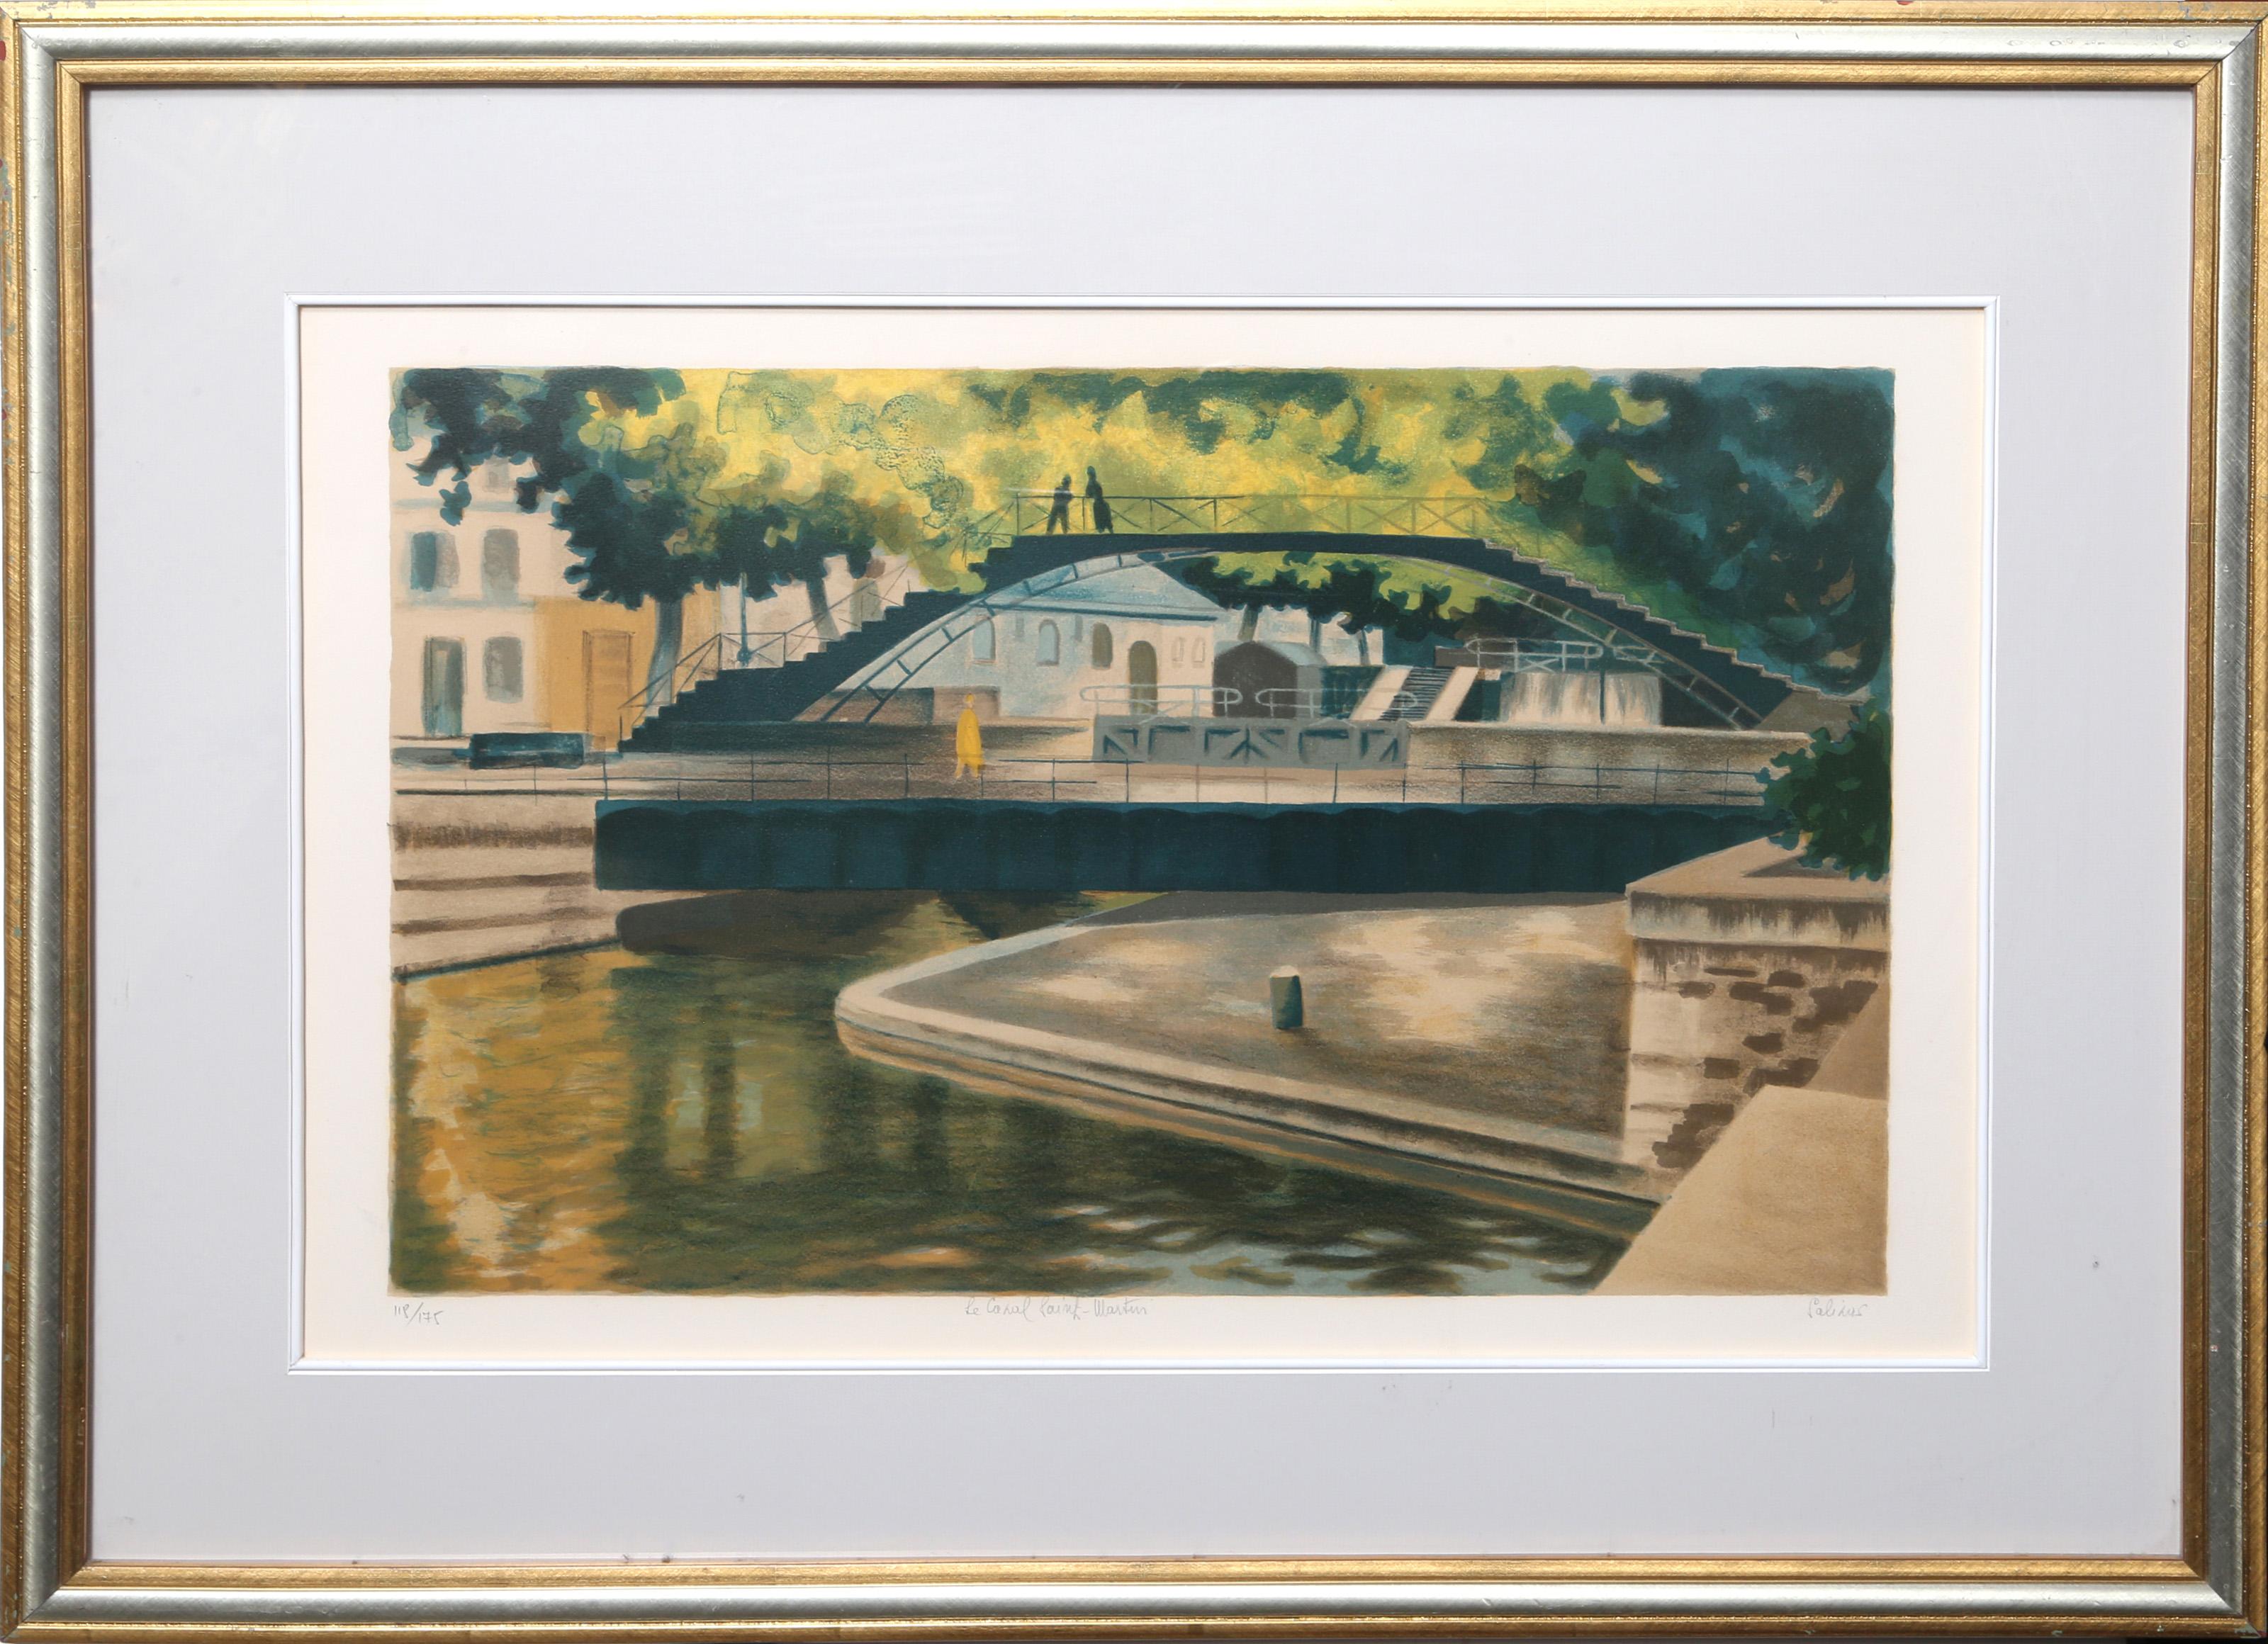 Laurent Marcel Salinas, Egyptian/French (1913 - 2010) -  Le Canal Saint-Martin. Year: circa 1970, Medium: Lithograph, signed and numbered in pencil, Edition: 118/175, Image Size: 15.5 x 25 inches, Size: 21 x 29 in. (53.34 x 73.66 cm), Frame Size: